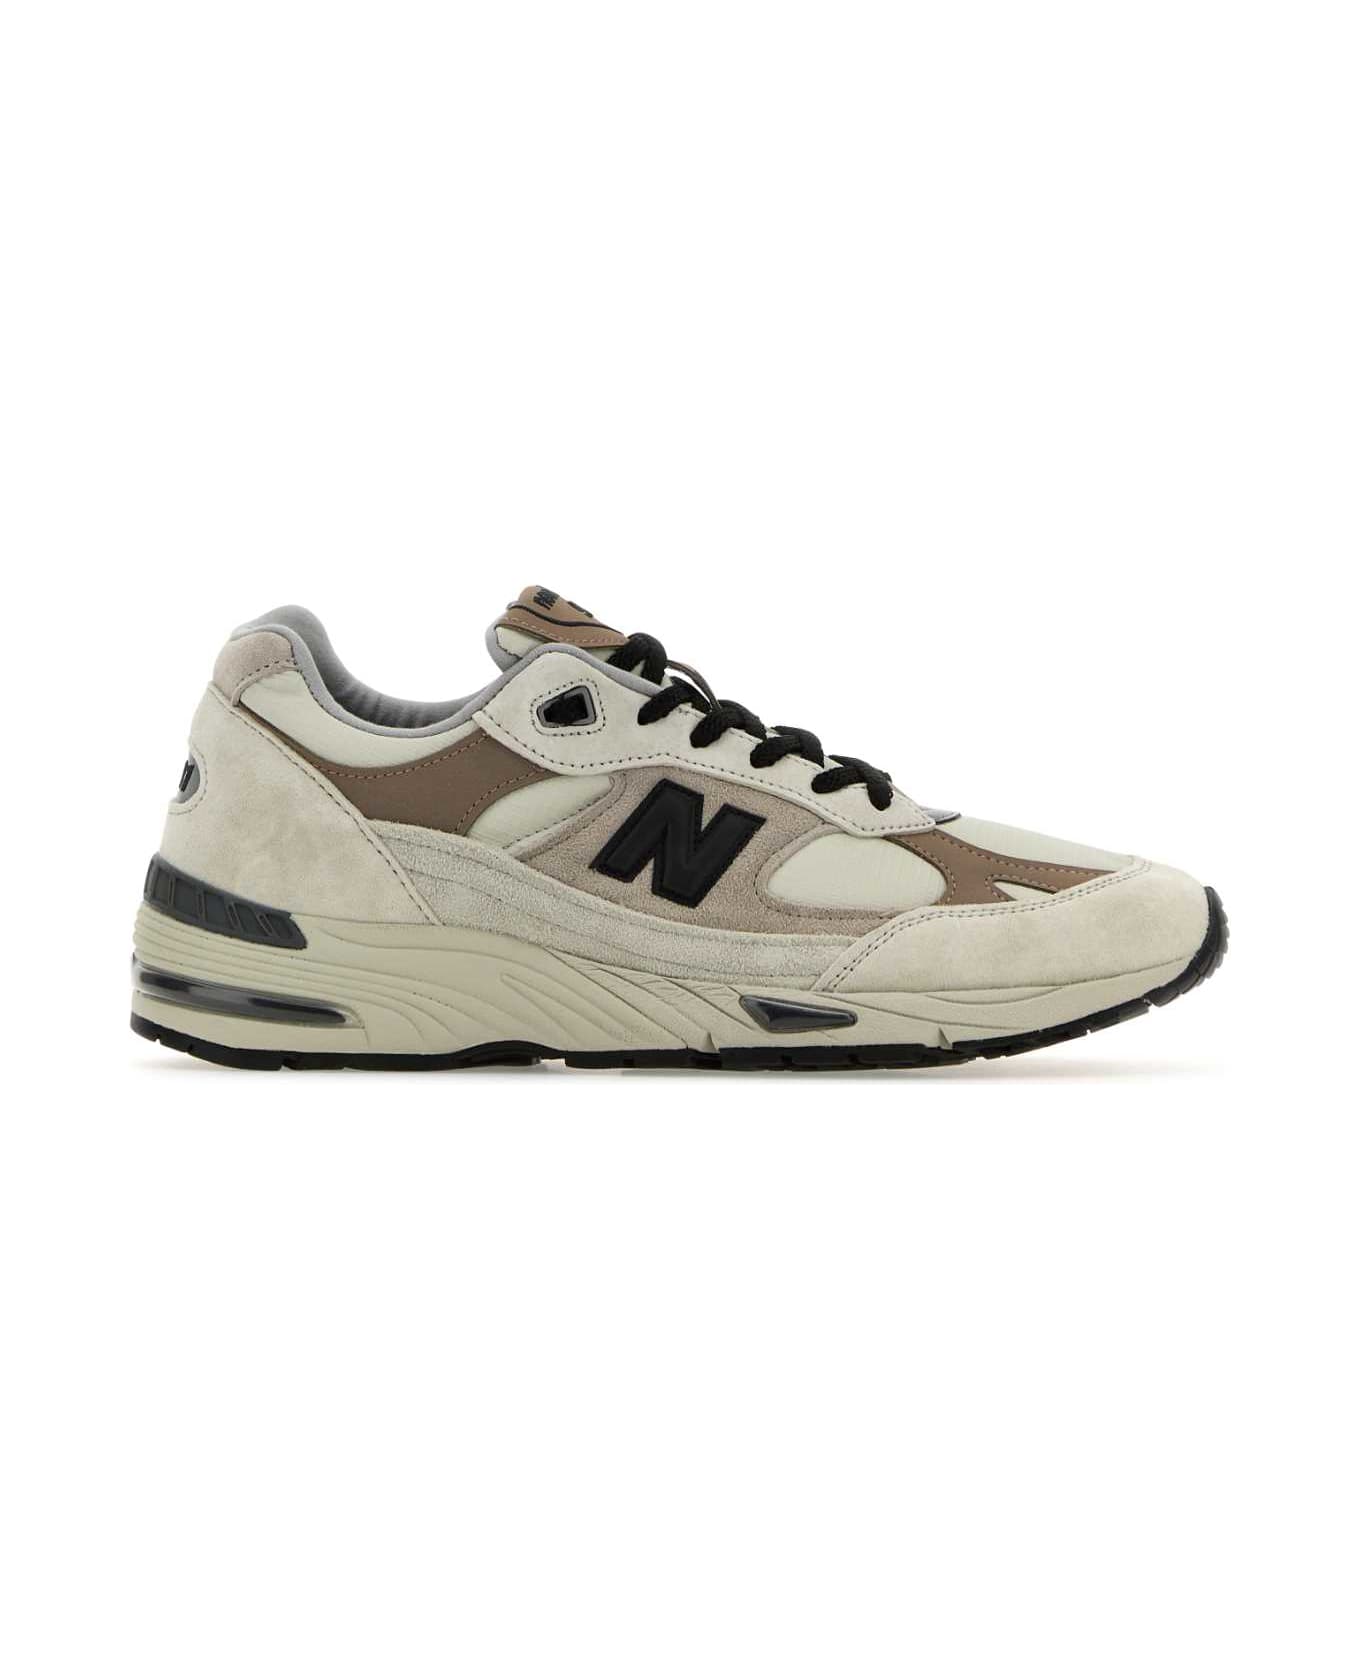 New Balance Multicolor Leather And Fabric Made In Usa 991 Sneakers - BEIGE